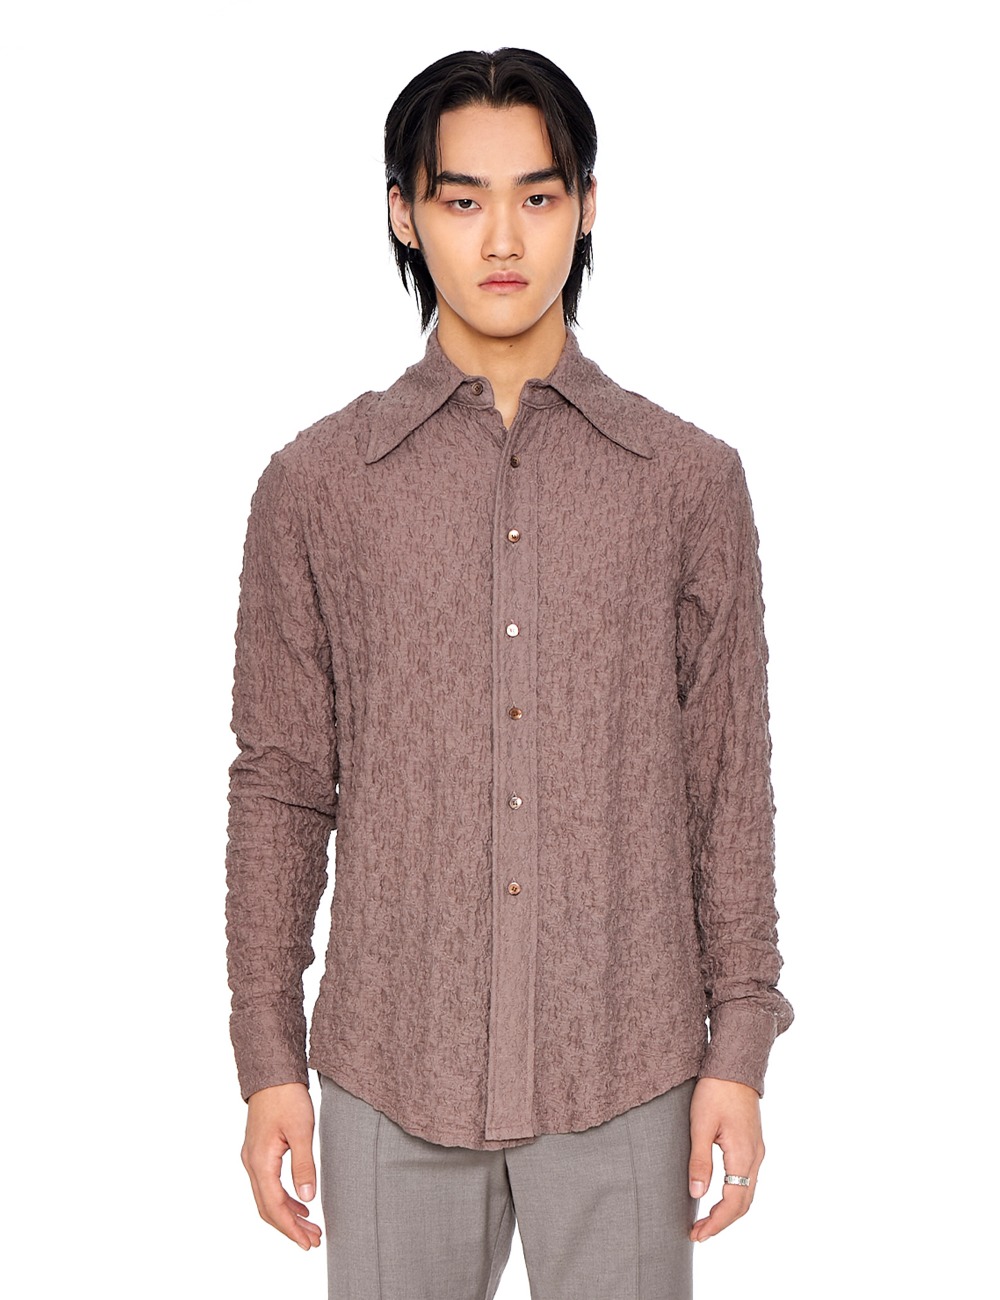 CLASSIC L/S SHIRTS_BROWN LACE